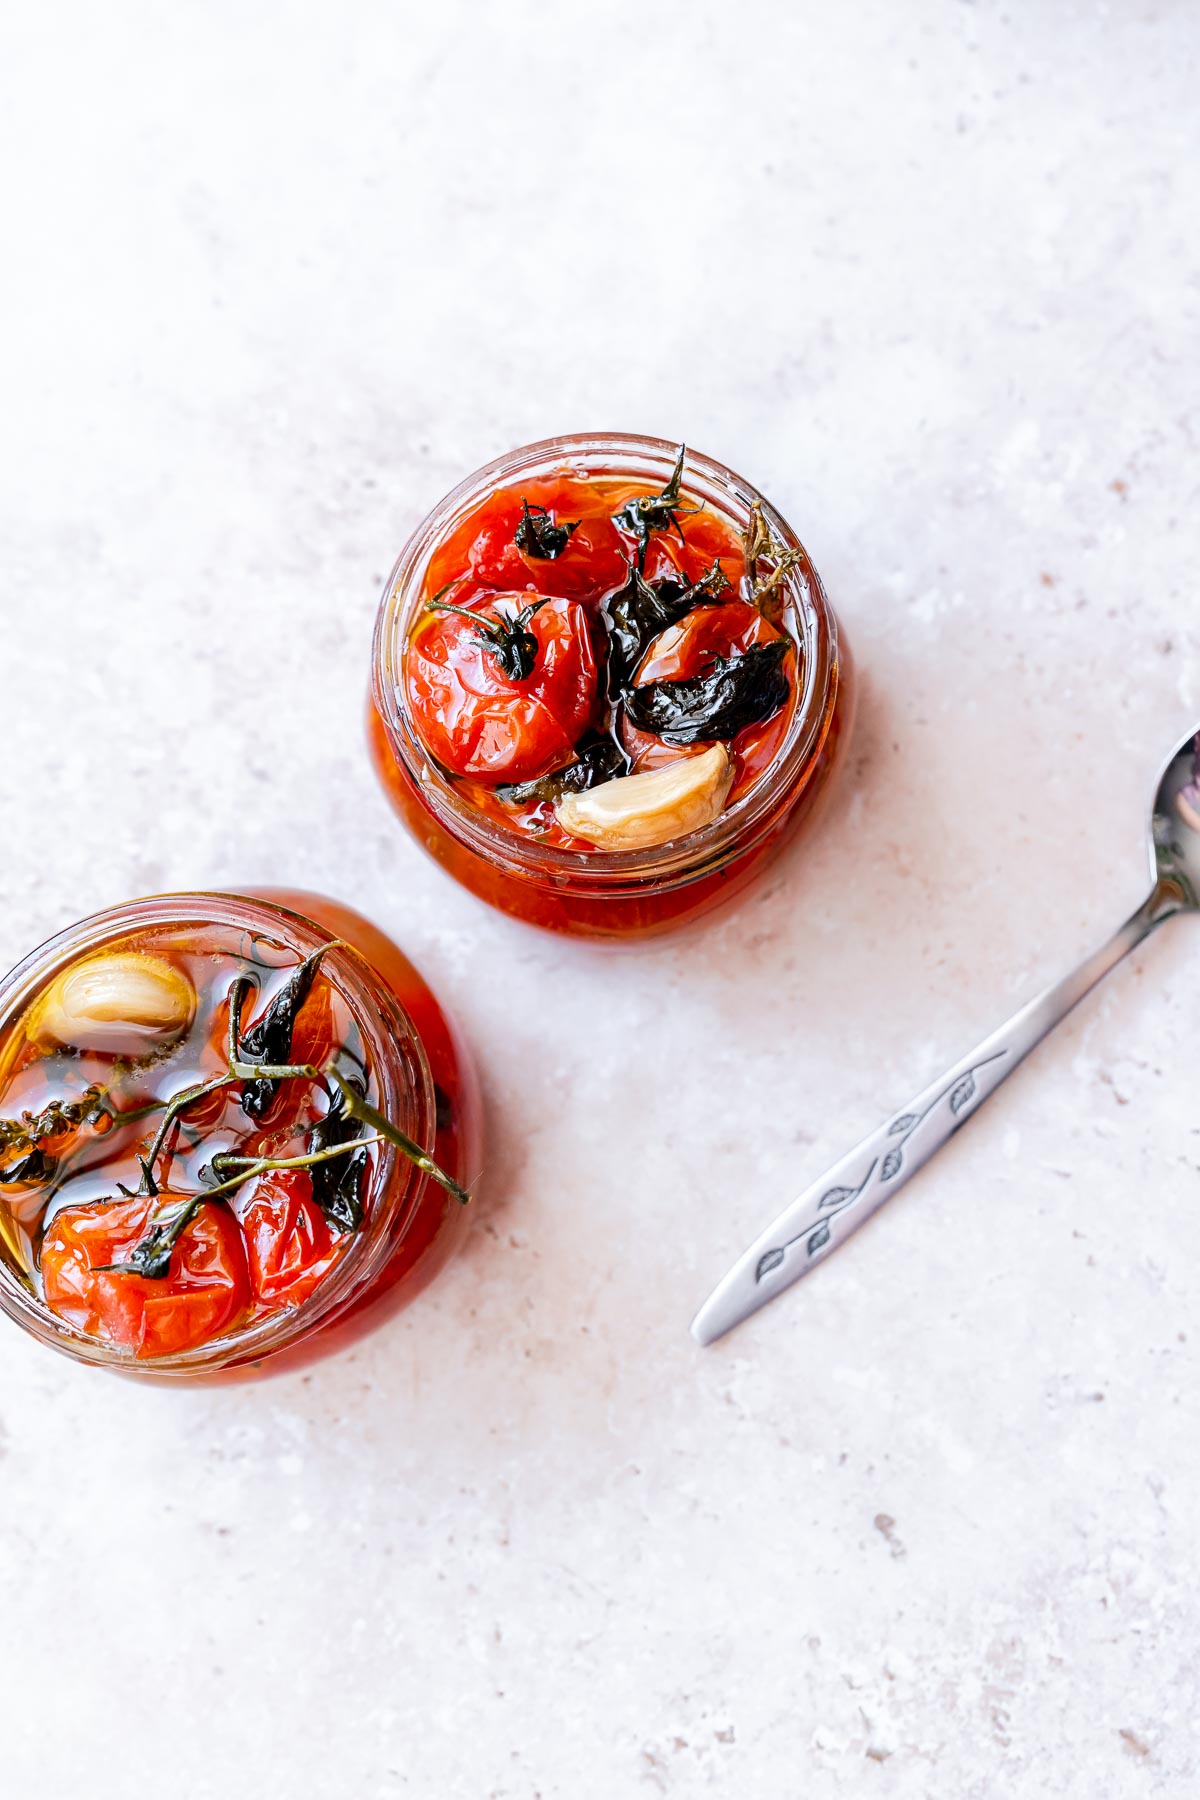 Two clear open glass jars filled with oil and softened tomatoes.